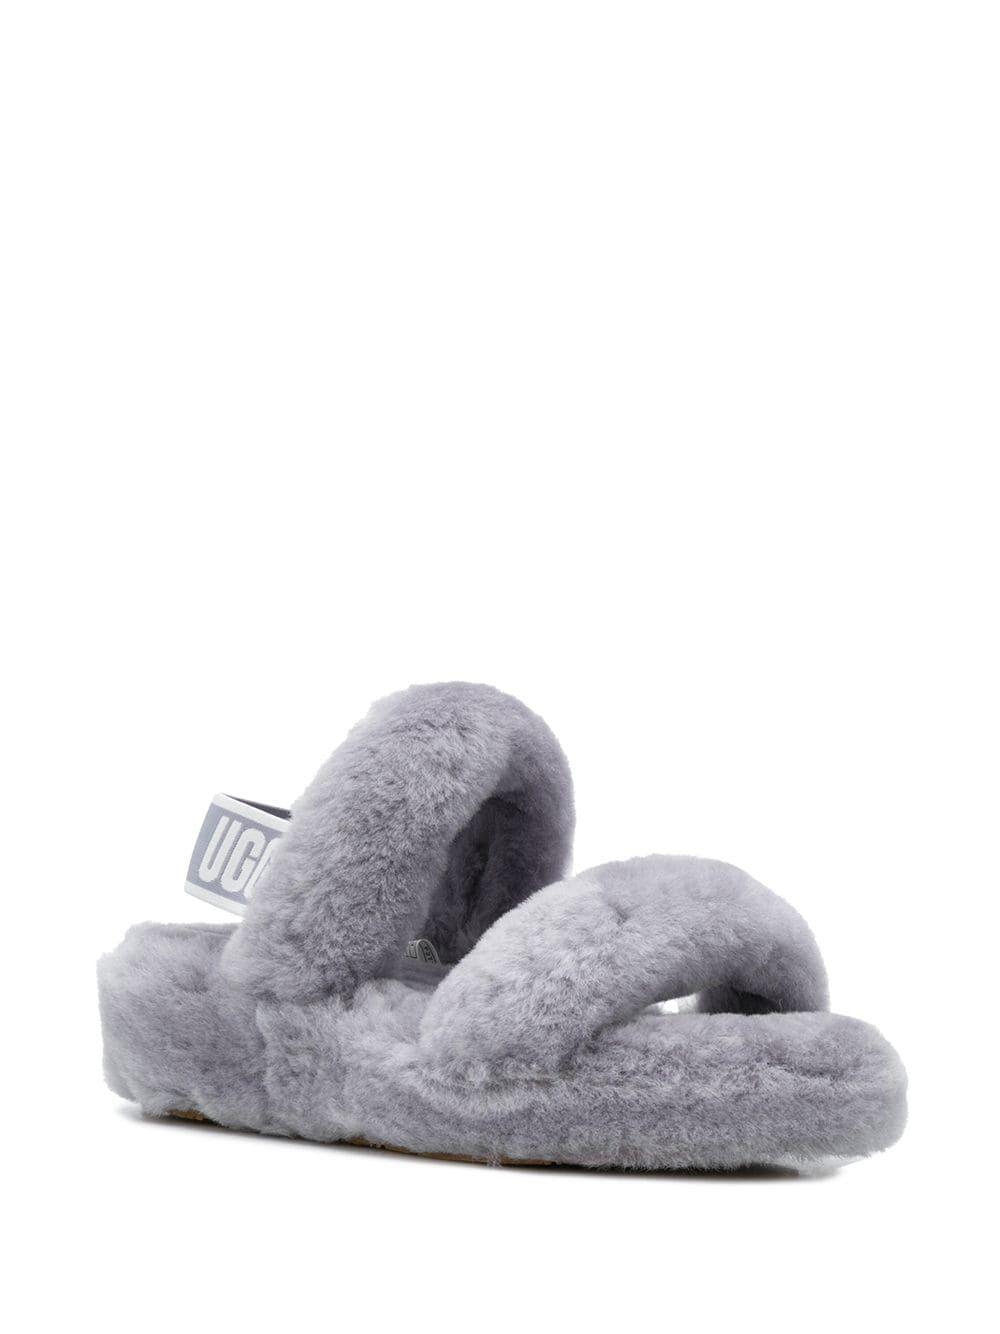 UGG Synthetic Oh Yeah Slippers in Grey (Gray) - Lyst